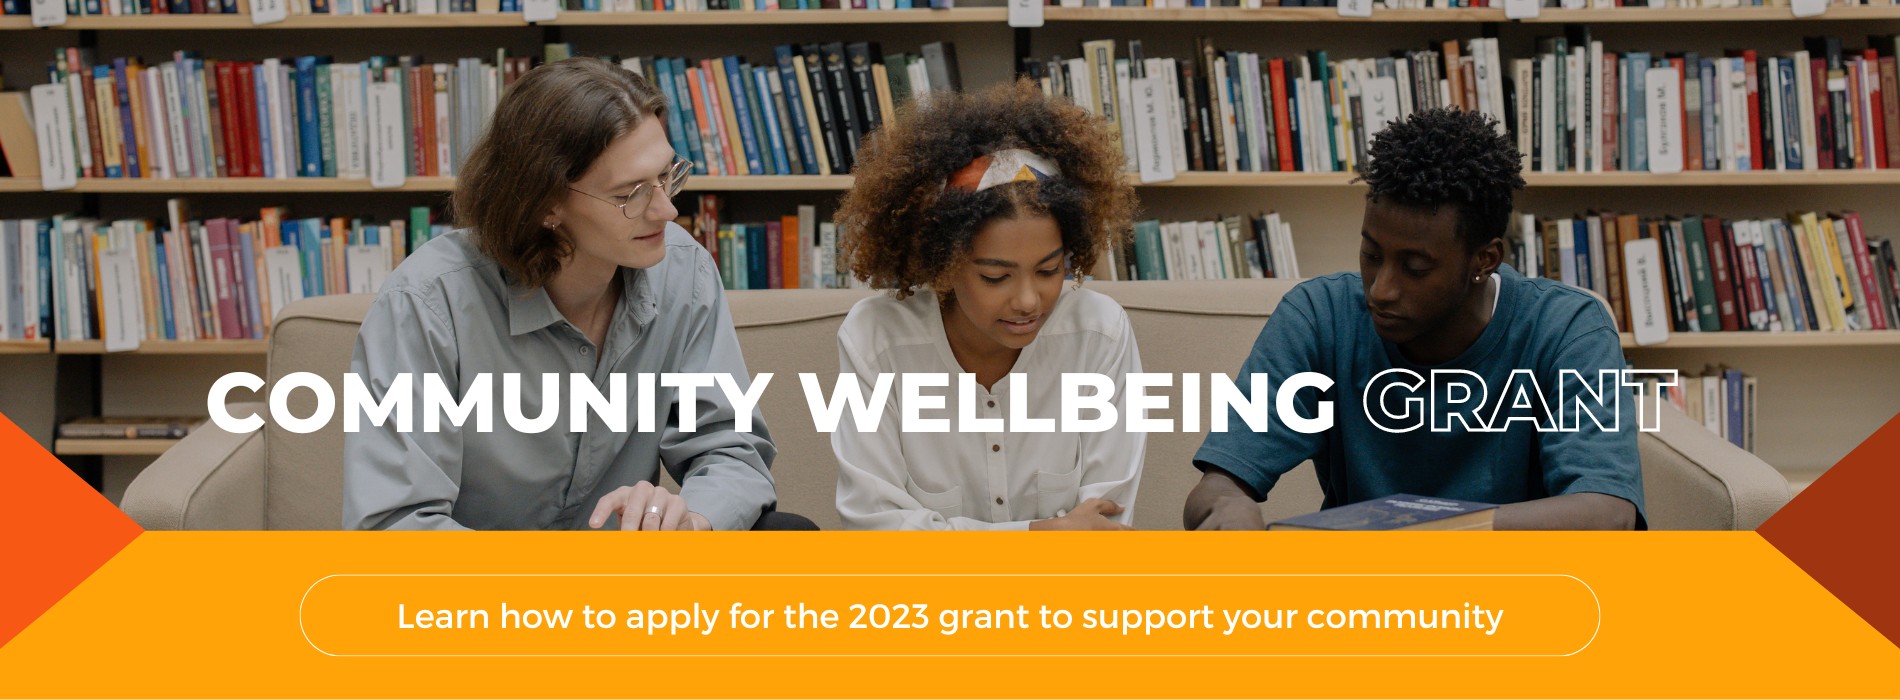 Community Wellbeing Grant: Learn how to apply for the 2023 grant to support your community